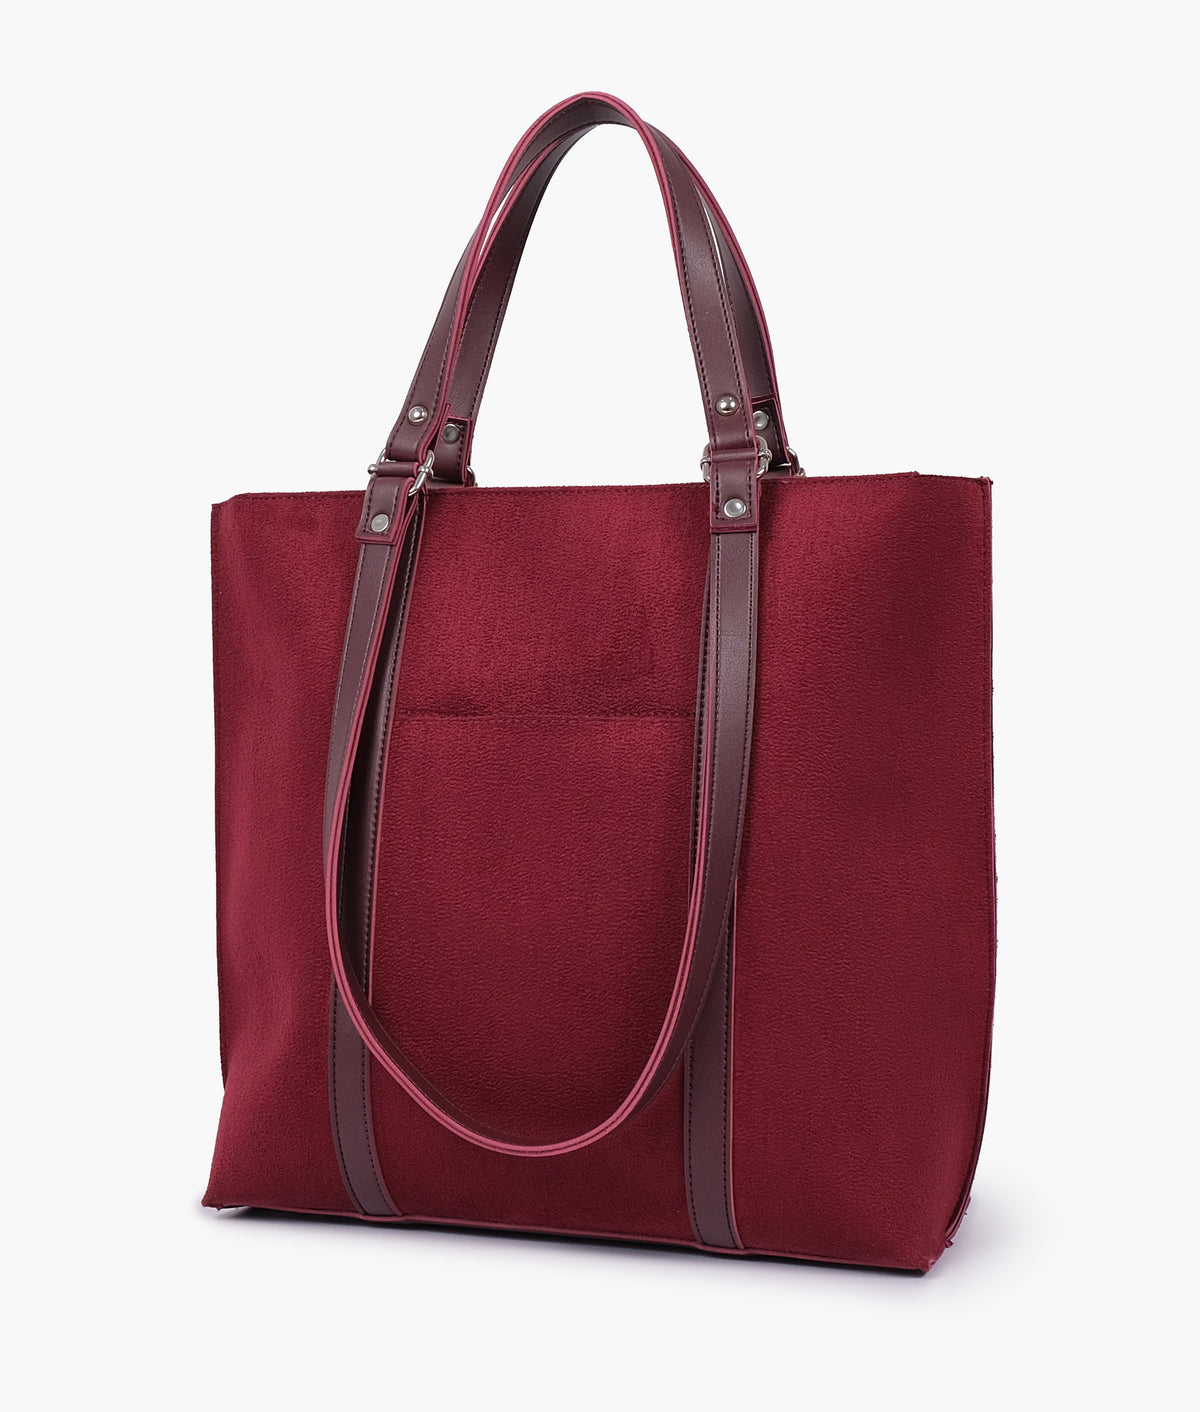 Burgundy suede double-handle tote bag – RTW Creation